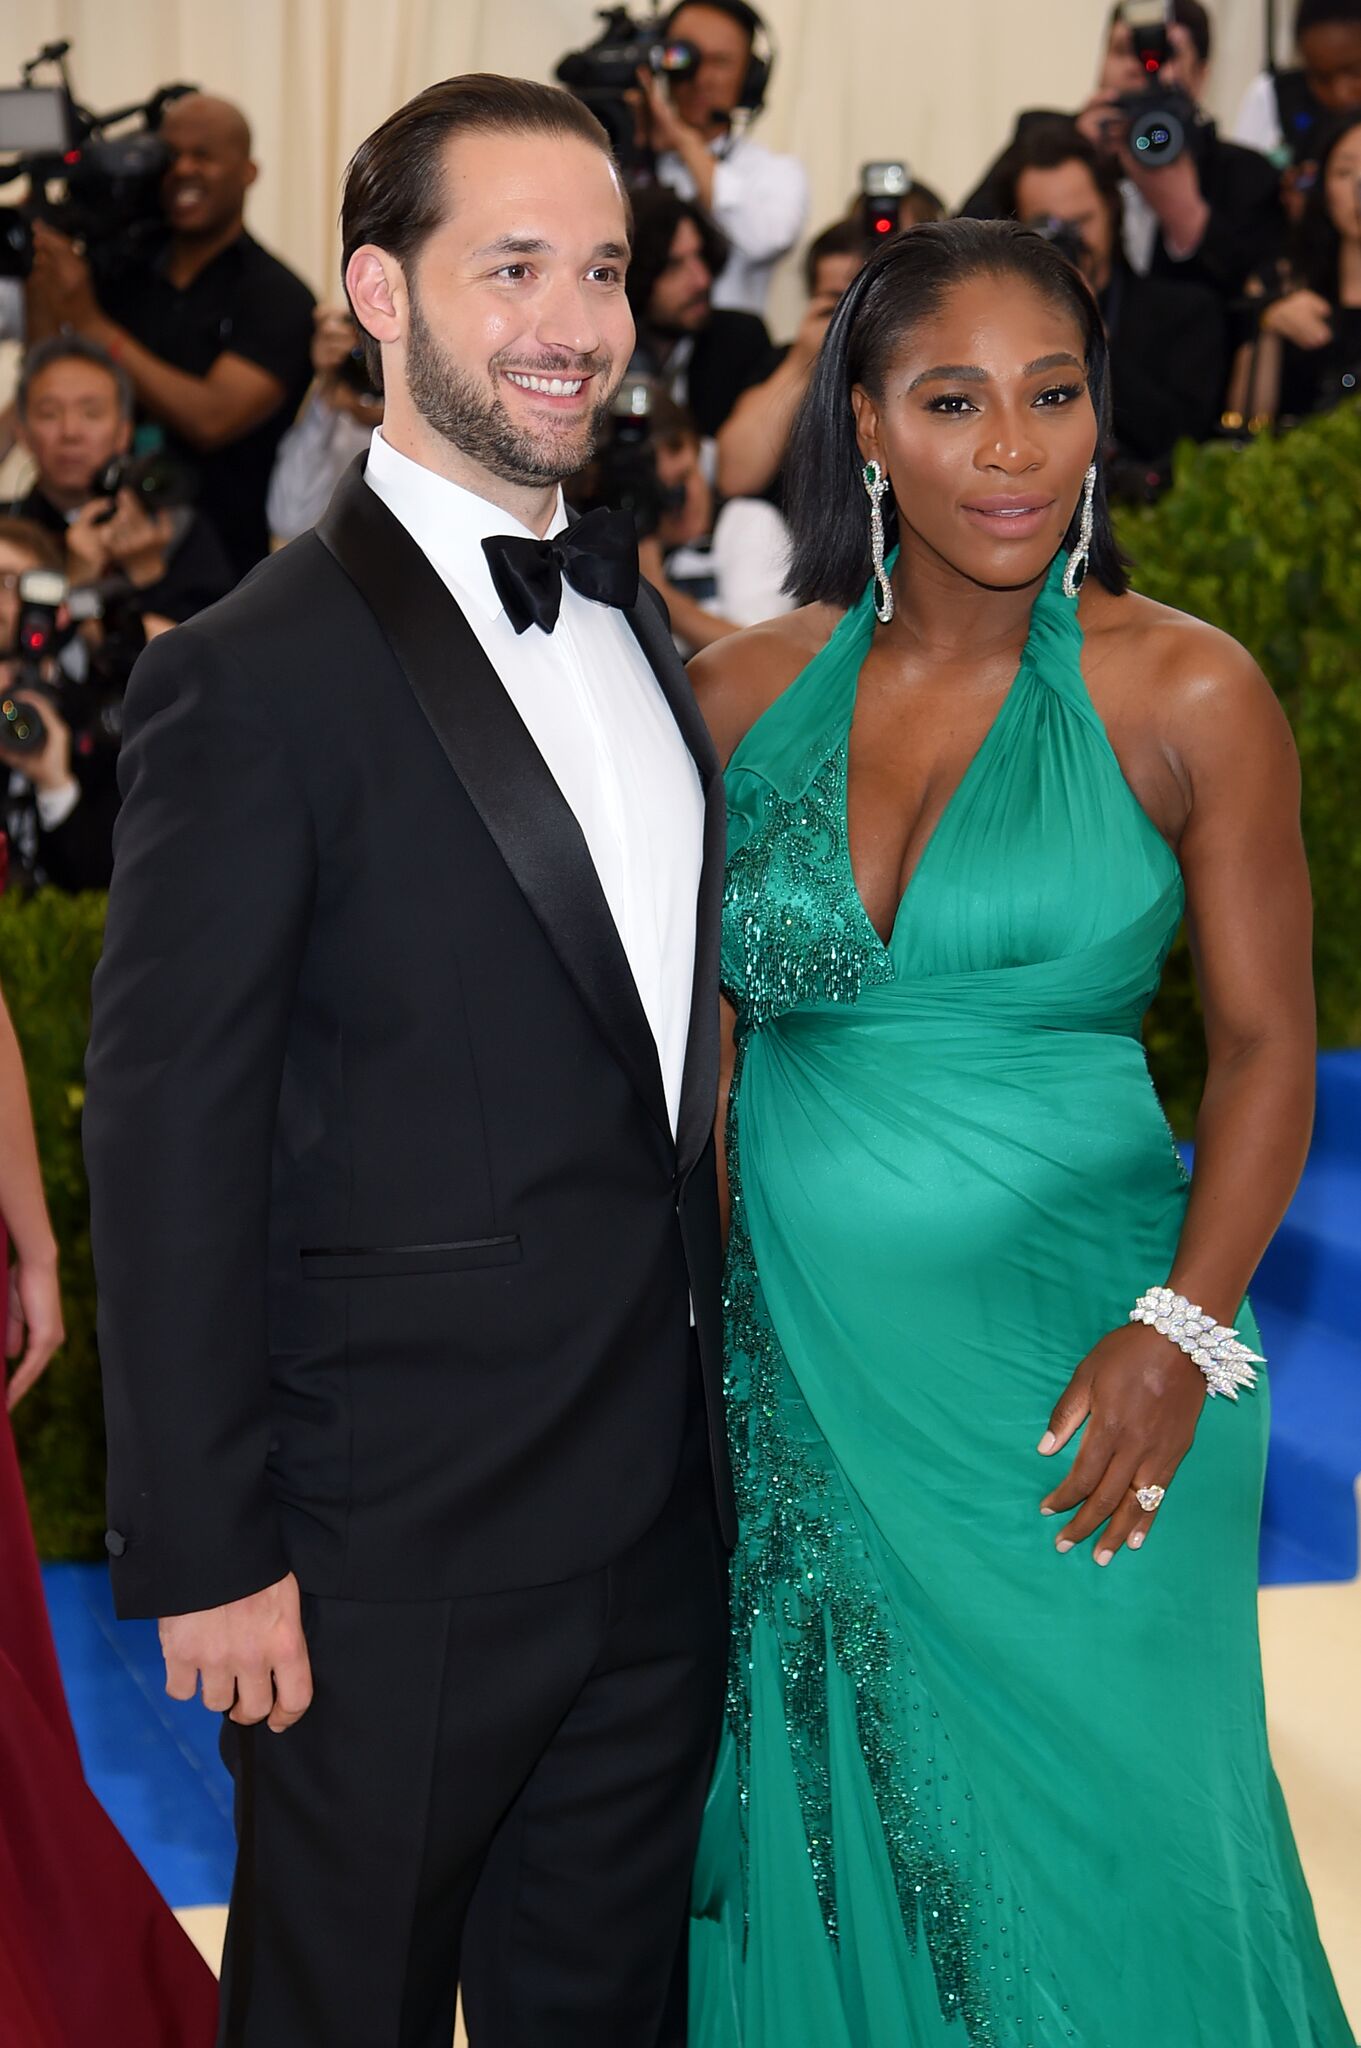 Alexis Ohanian and Serena Williams at the Metropolitan Museum of Art on May 1, 2017 | Photo: Getty Images